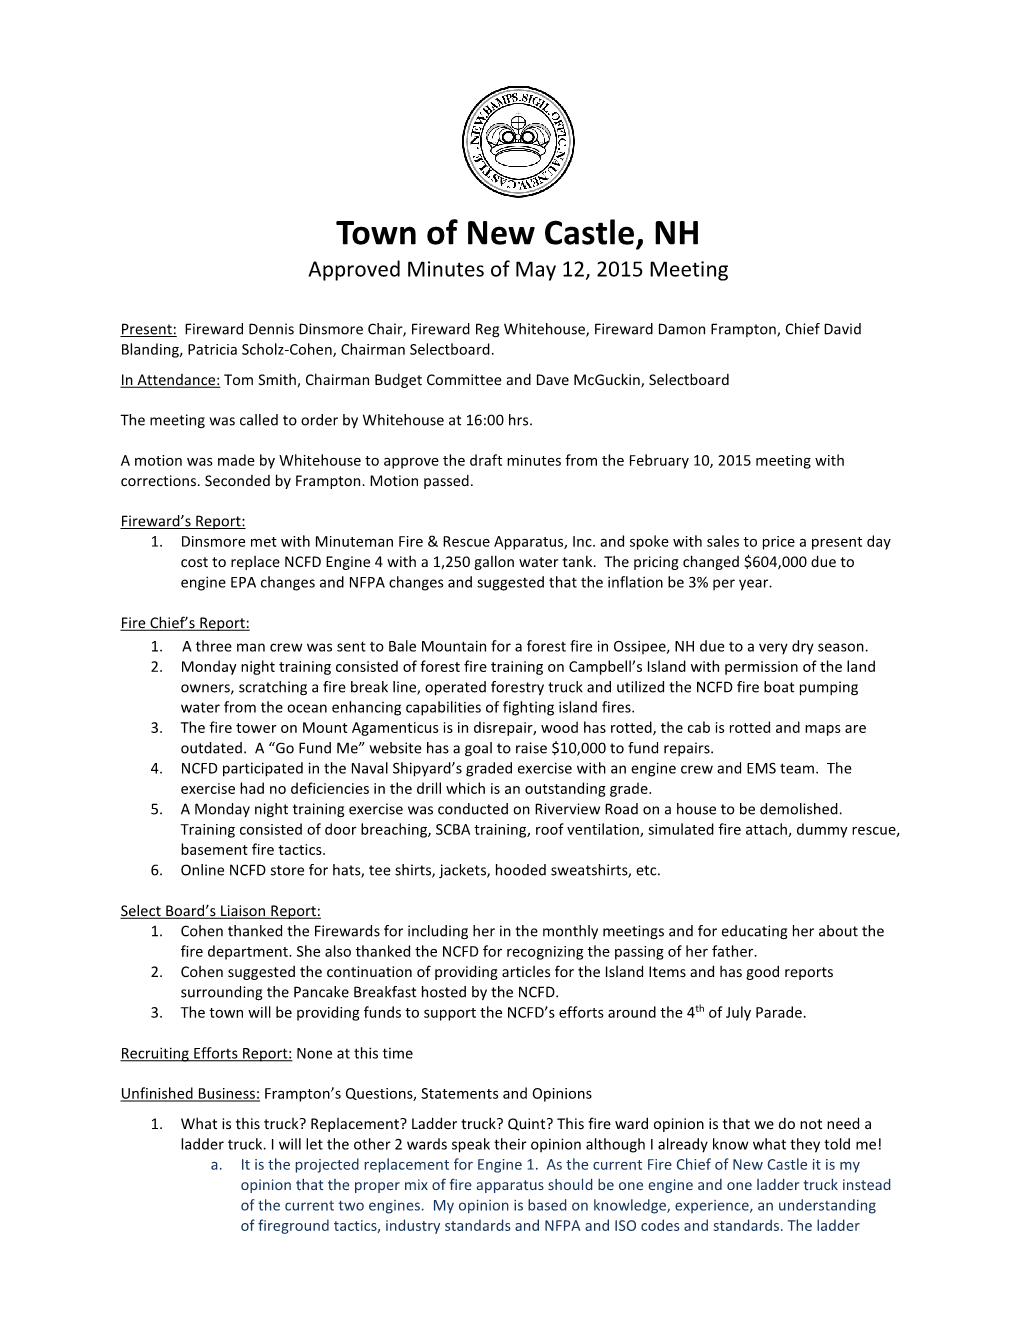 Town of New Castle, NH Approved Minutes of May 12, 2015 Meeting